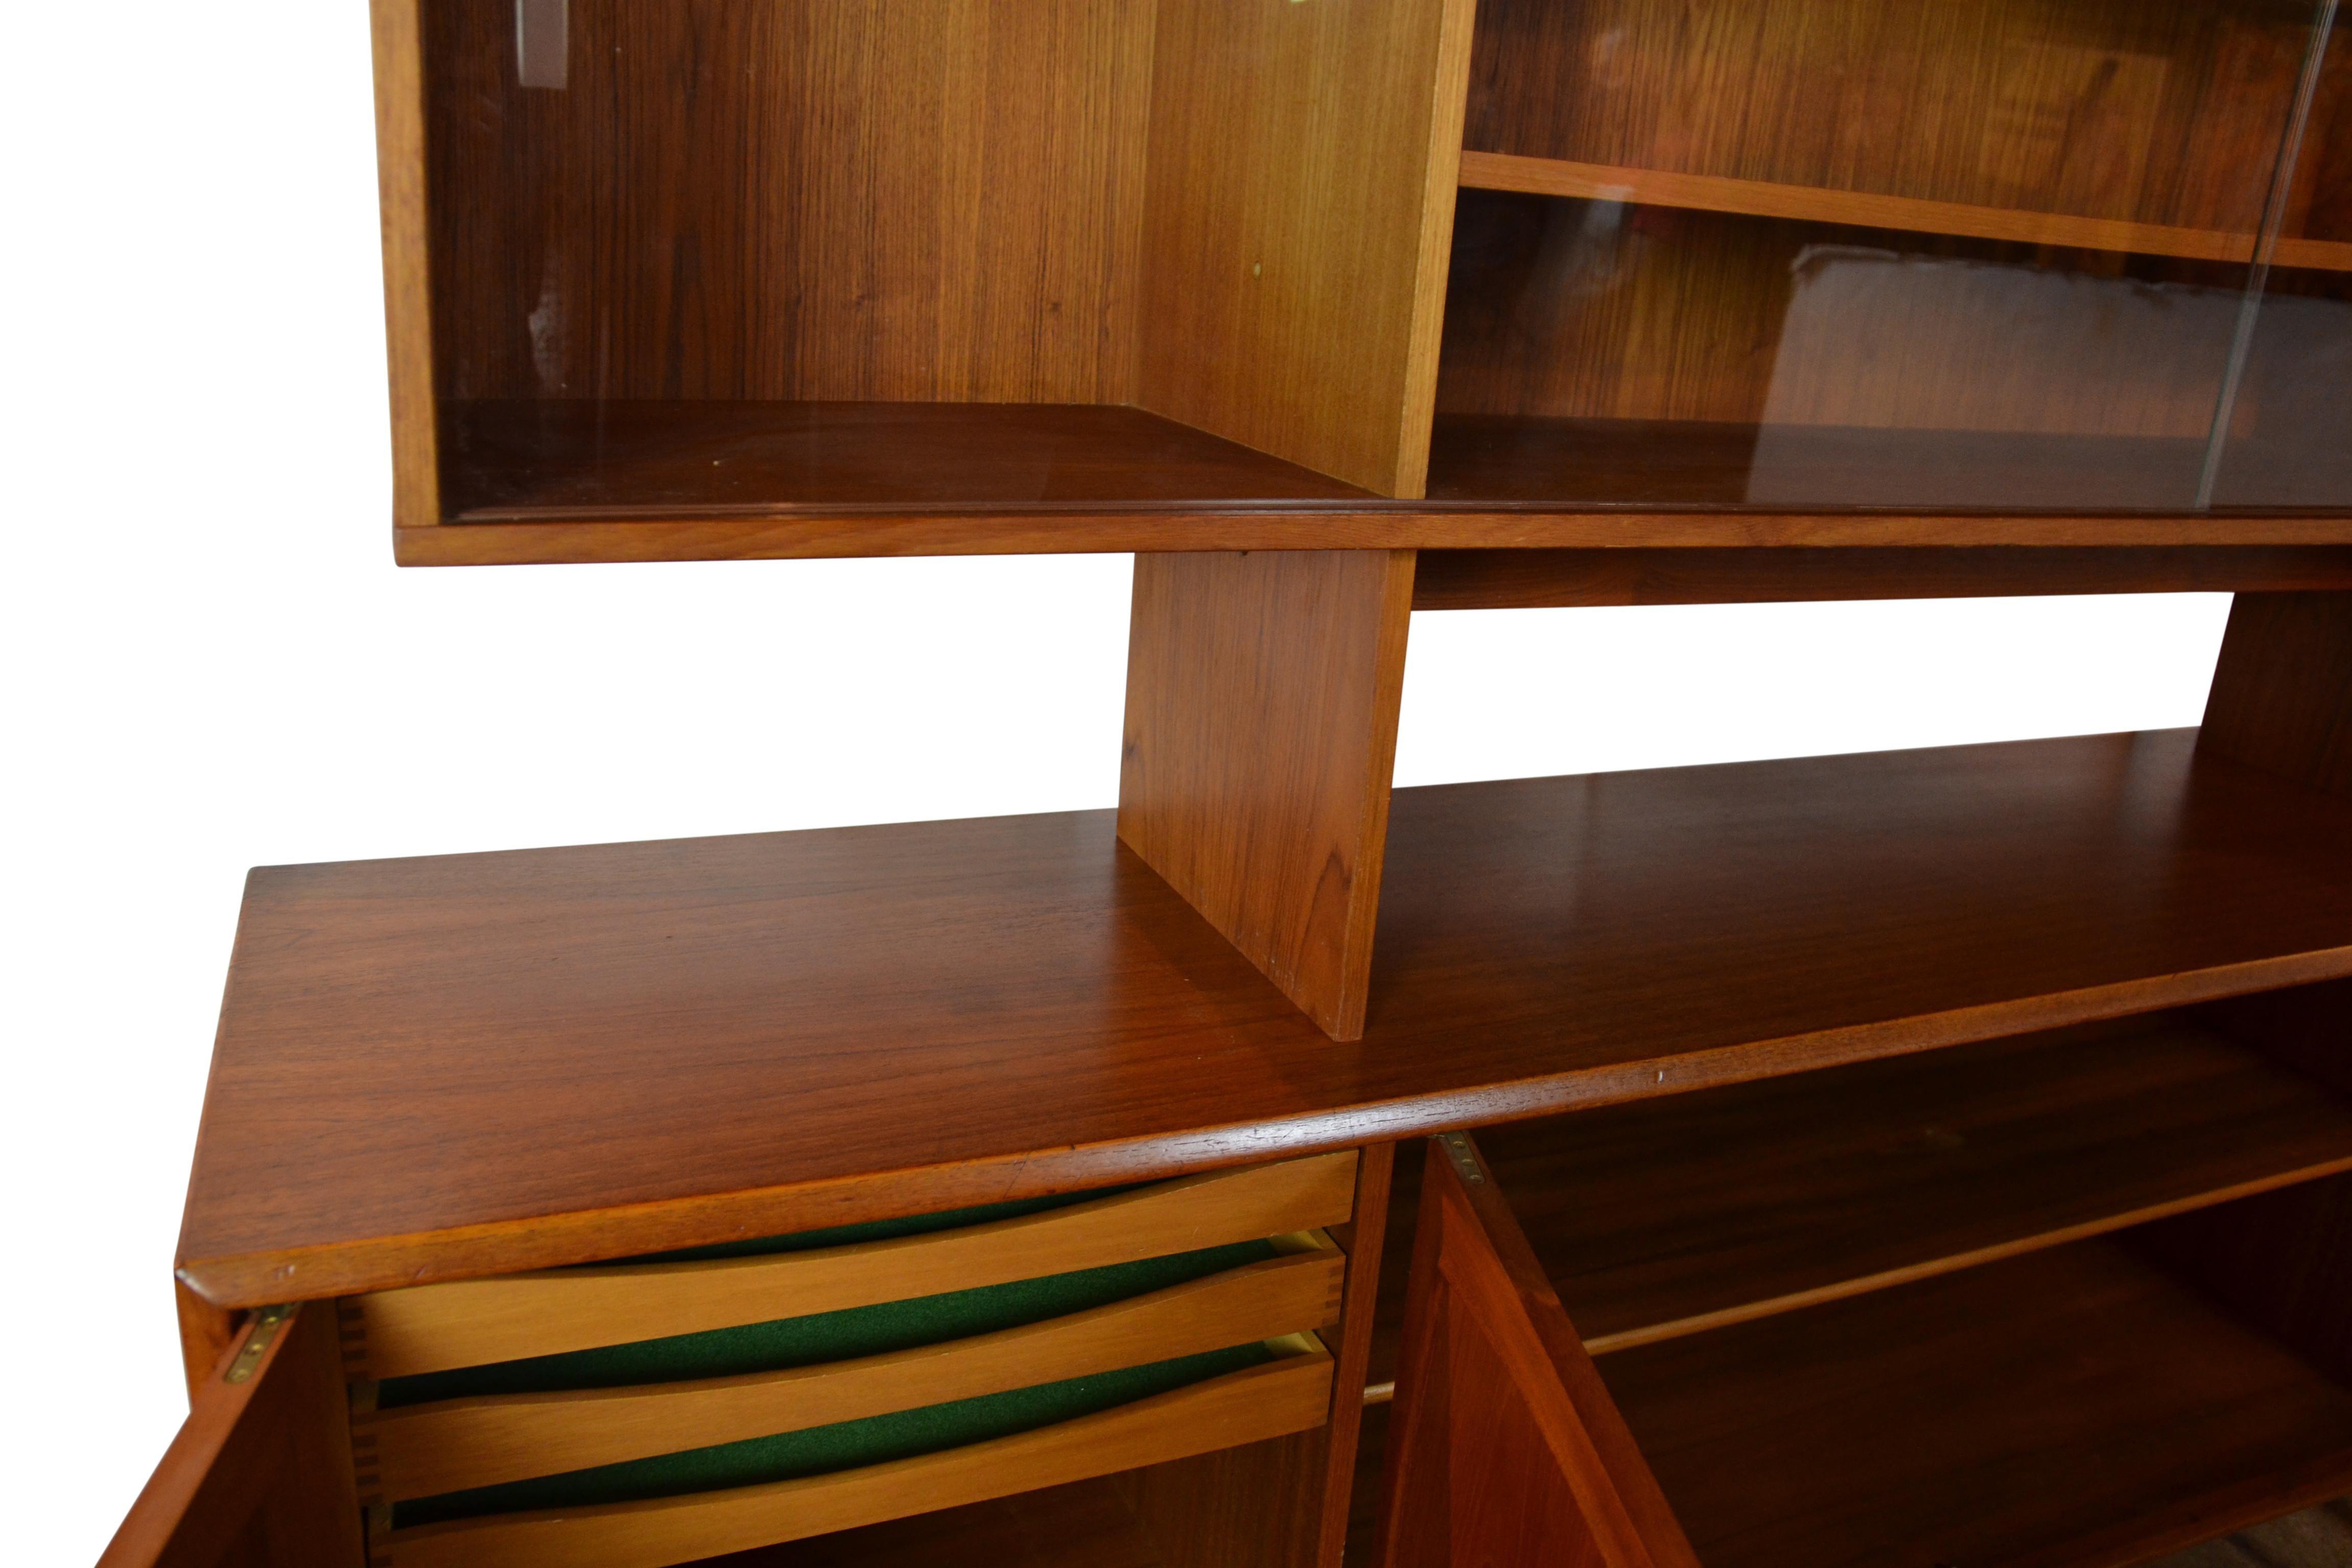 A 2 part midcentury teak-wood sideboard / buffet / bookcase with a removable top cabinet. Cupboards to the base and sliding glass doors to the top section. Small pegs hold the top in place but the top is removable.